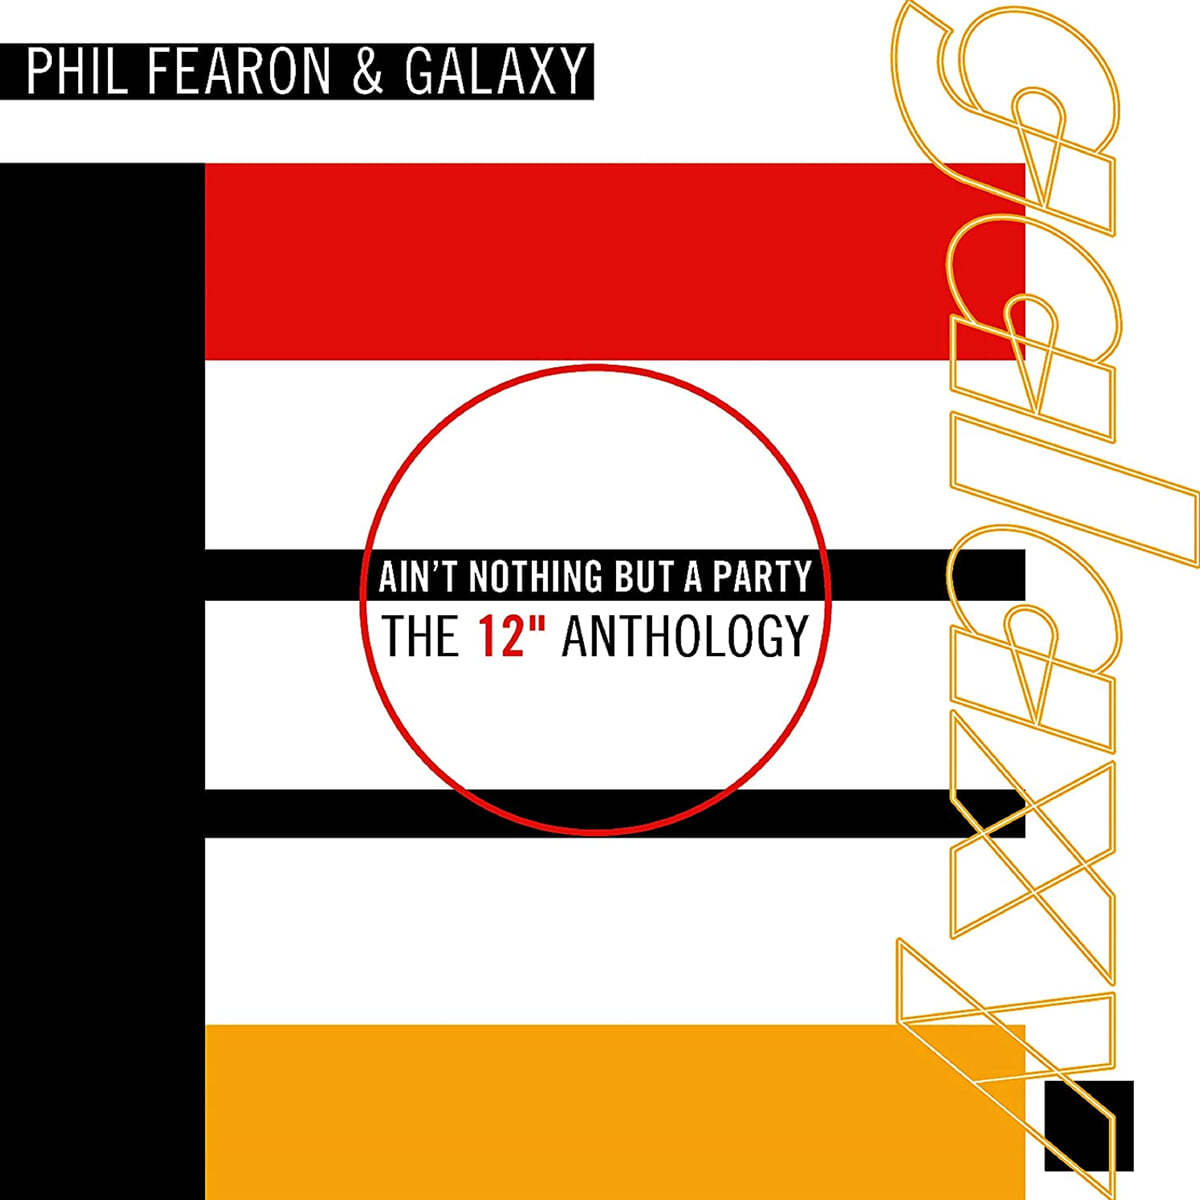 Phil Fearon & Galaxy (필 피론 앤 갤럭시) - Ain't Nothing But A Party - The 12" Anthology 